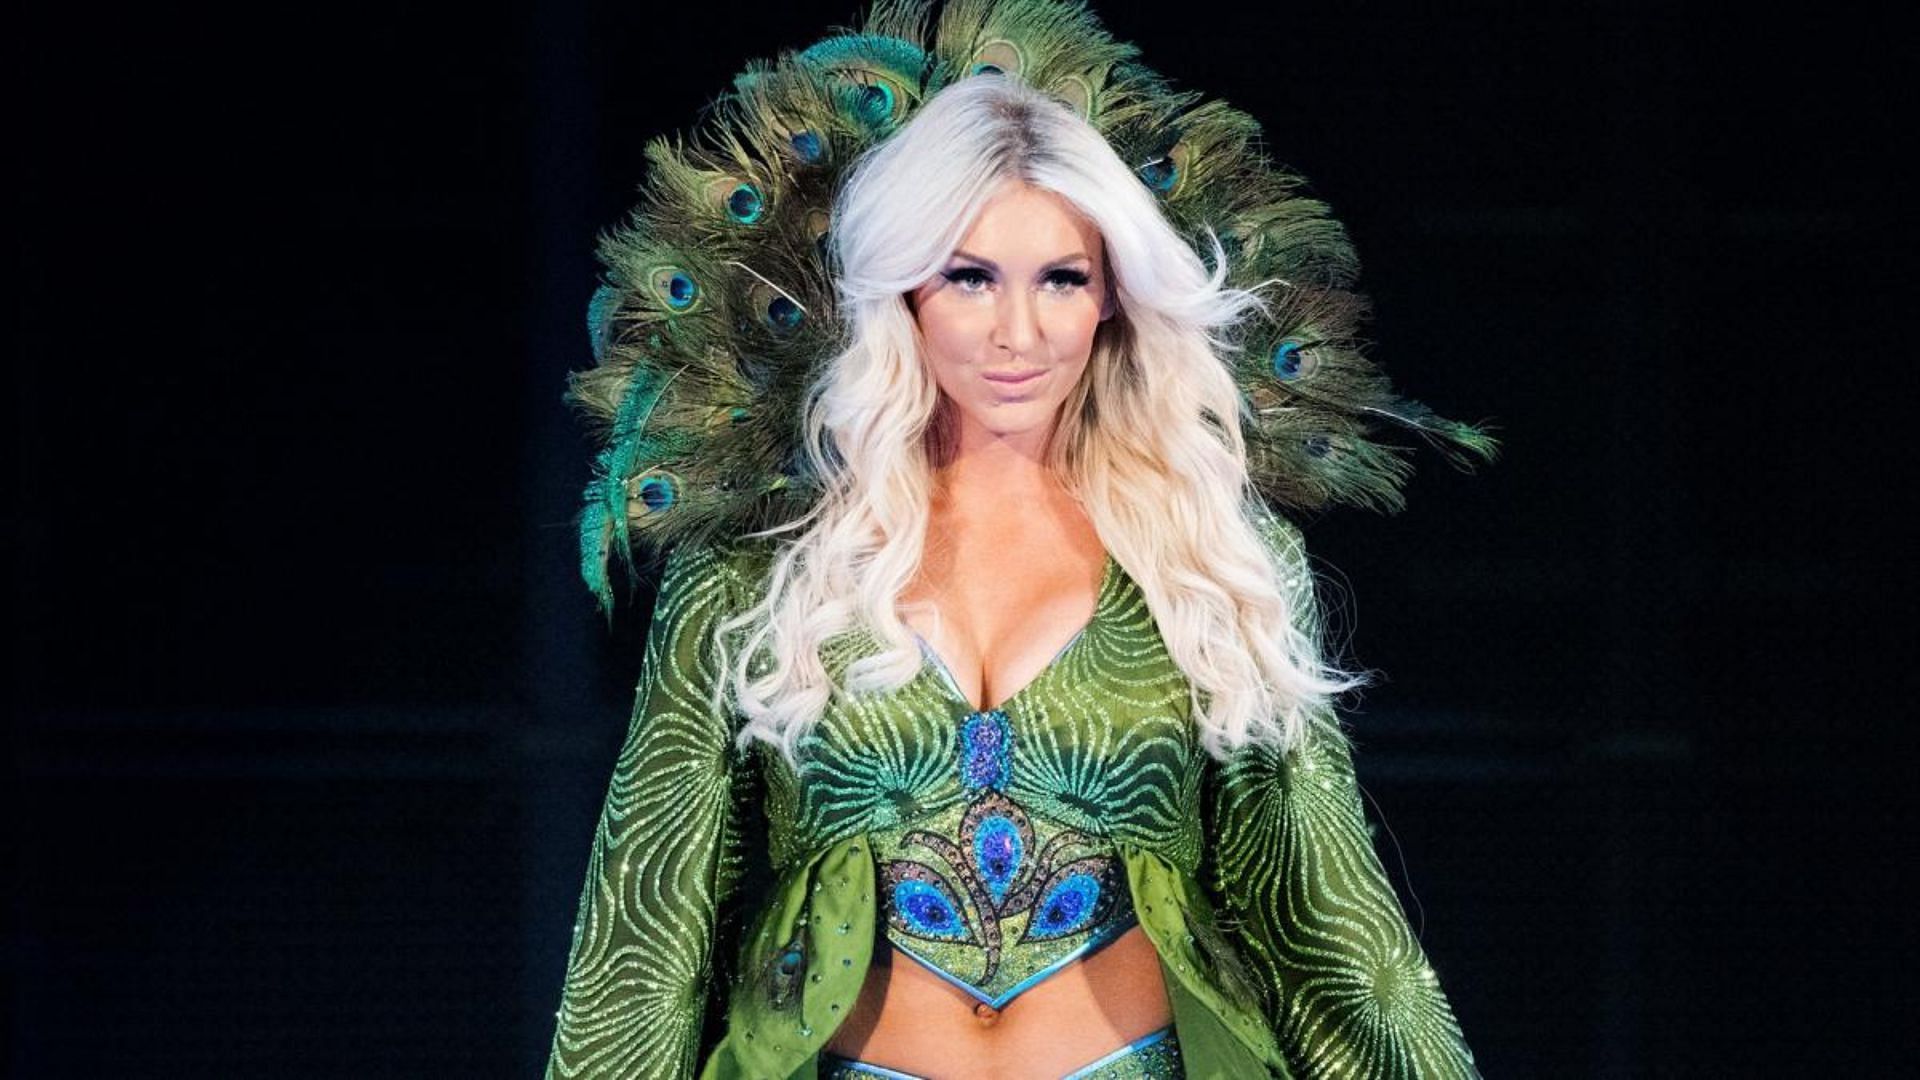 Charlotte Flair aims to keep improving.